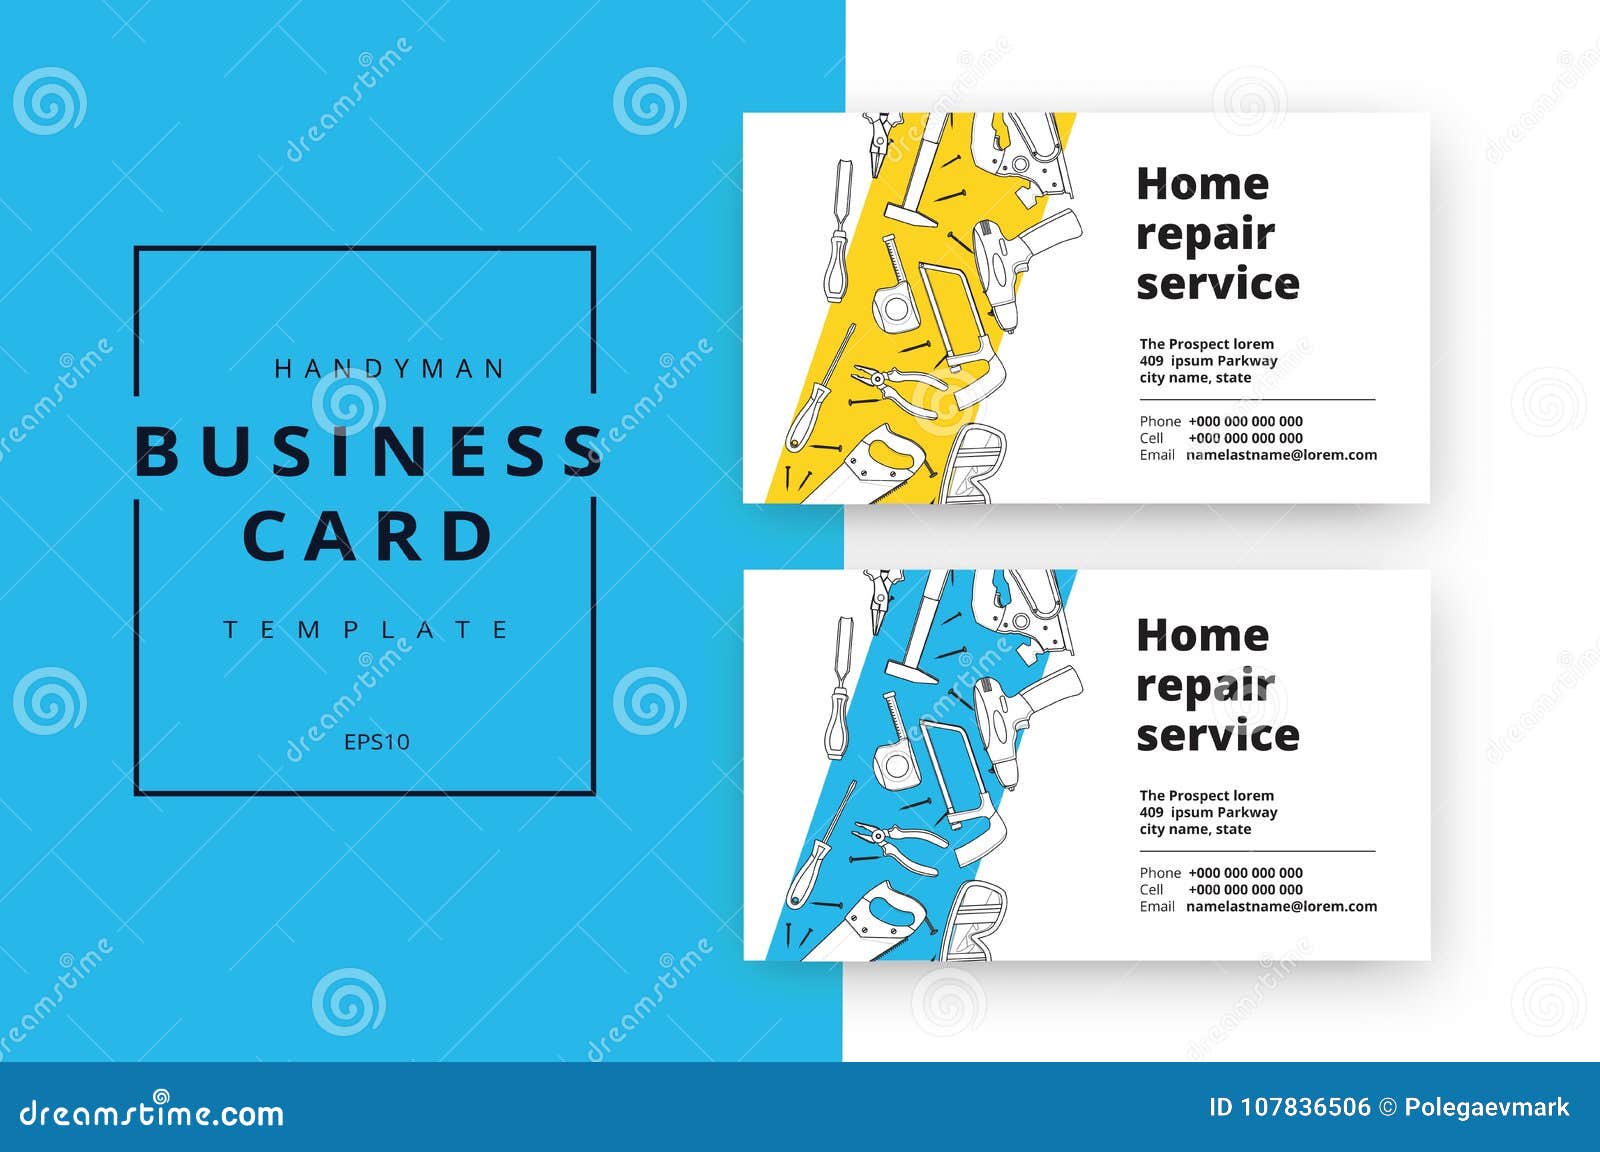 home improvement business cards examples 7